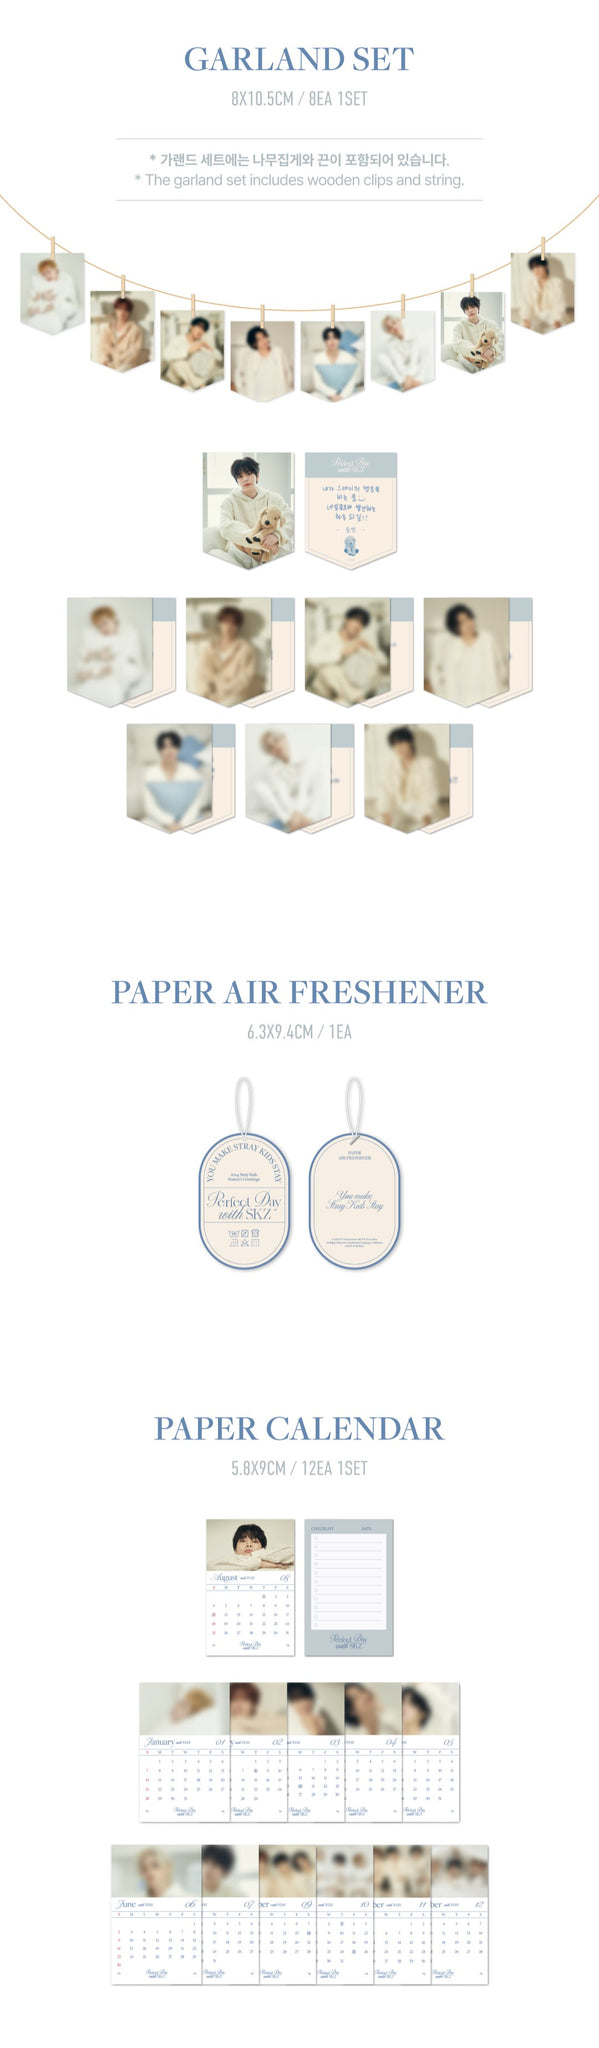 Perfect Day with SKZ Inclusions Garland Set Paper Air Freshener Paper Calendar